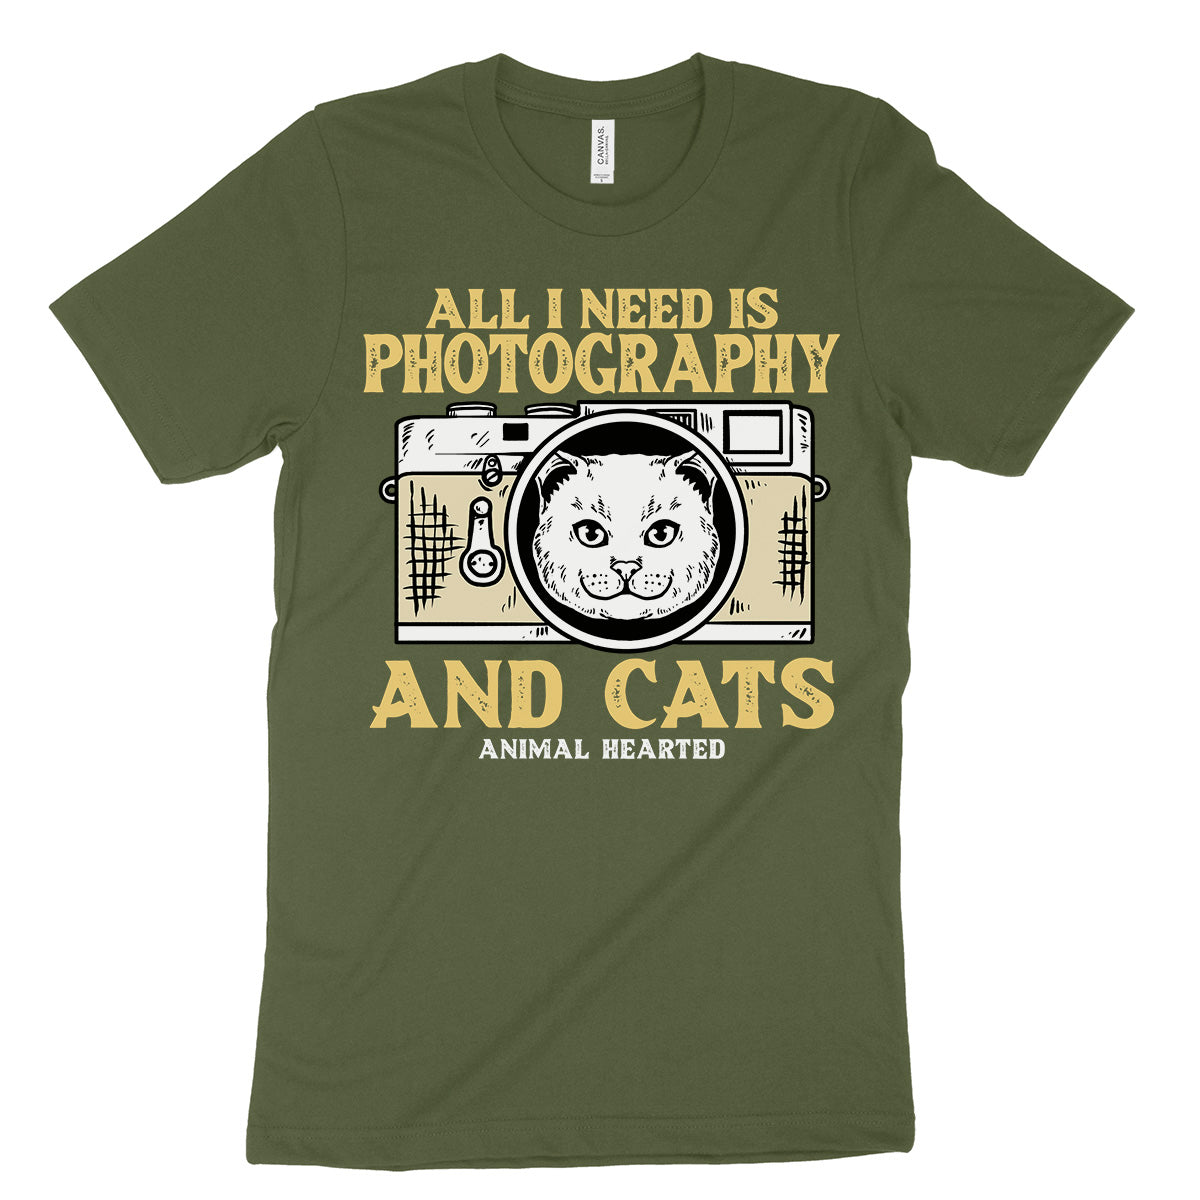 All I Need is Photography and Cats T-Shirt